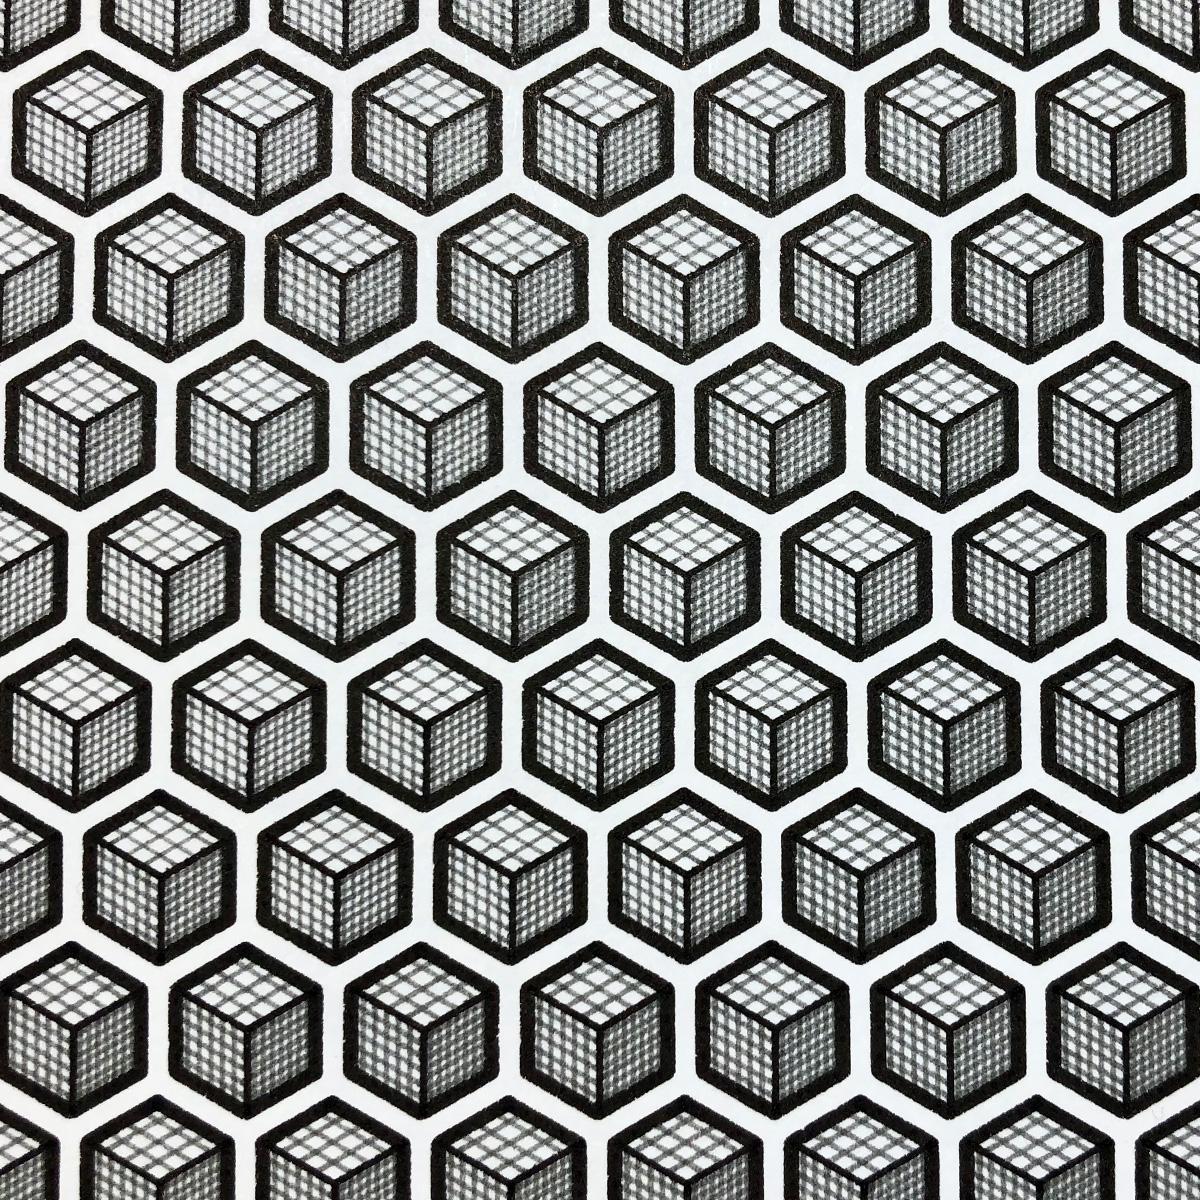 White paper covered in a spaced grid of black hexagon-based shapes, each with inner edge lines and hatching giving the appearance of isometric cubes to the hexagons